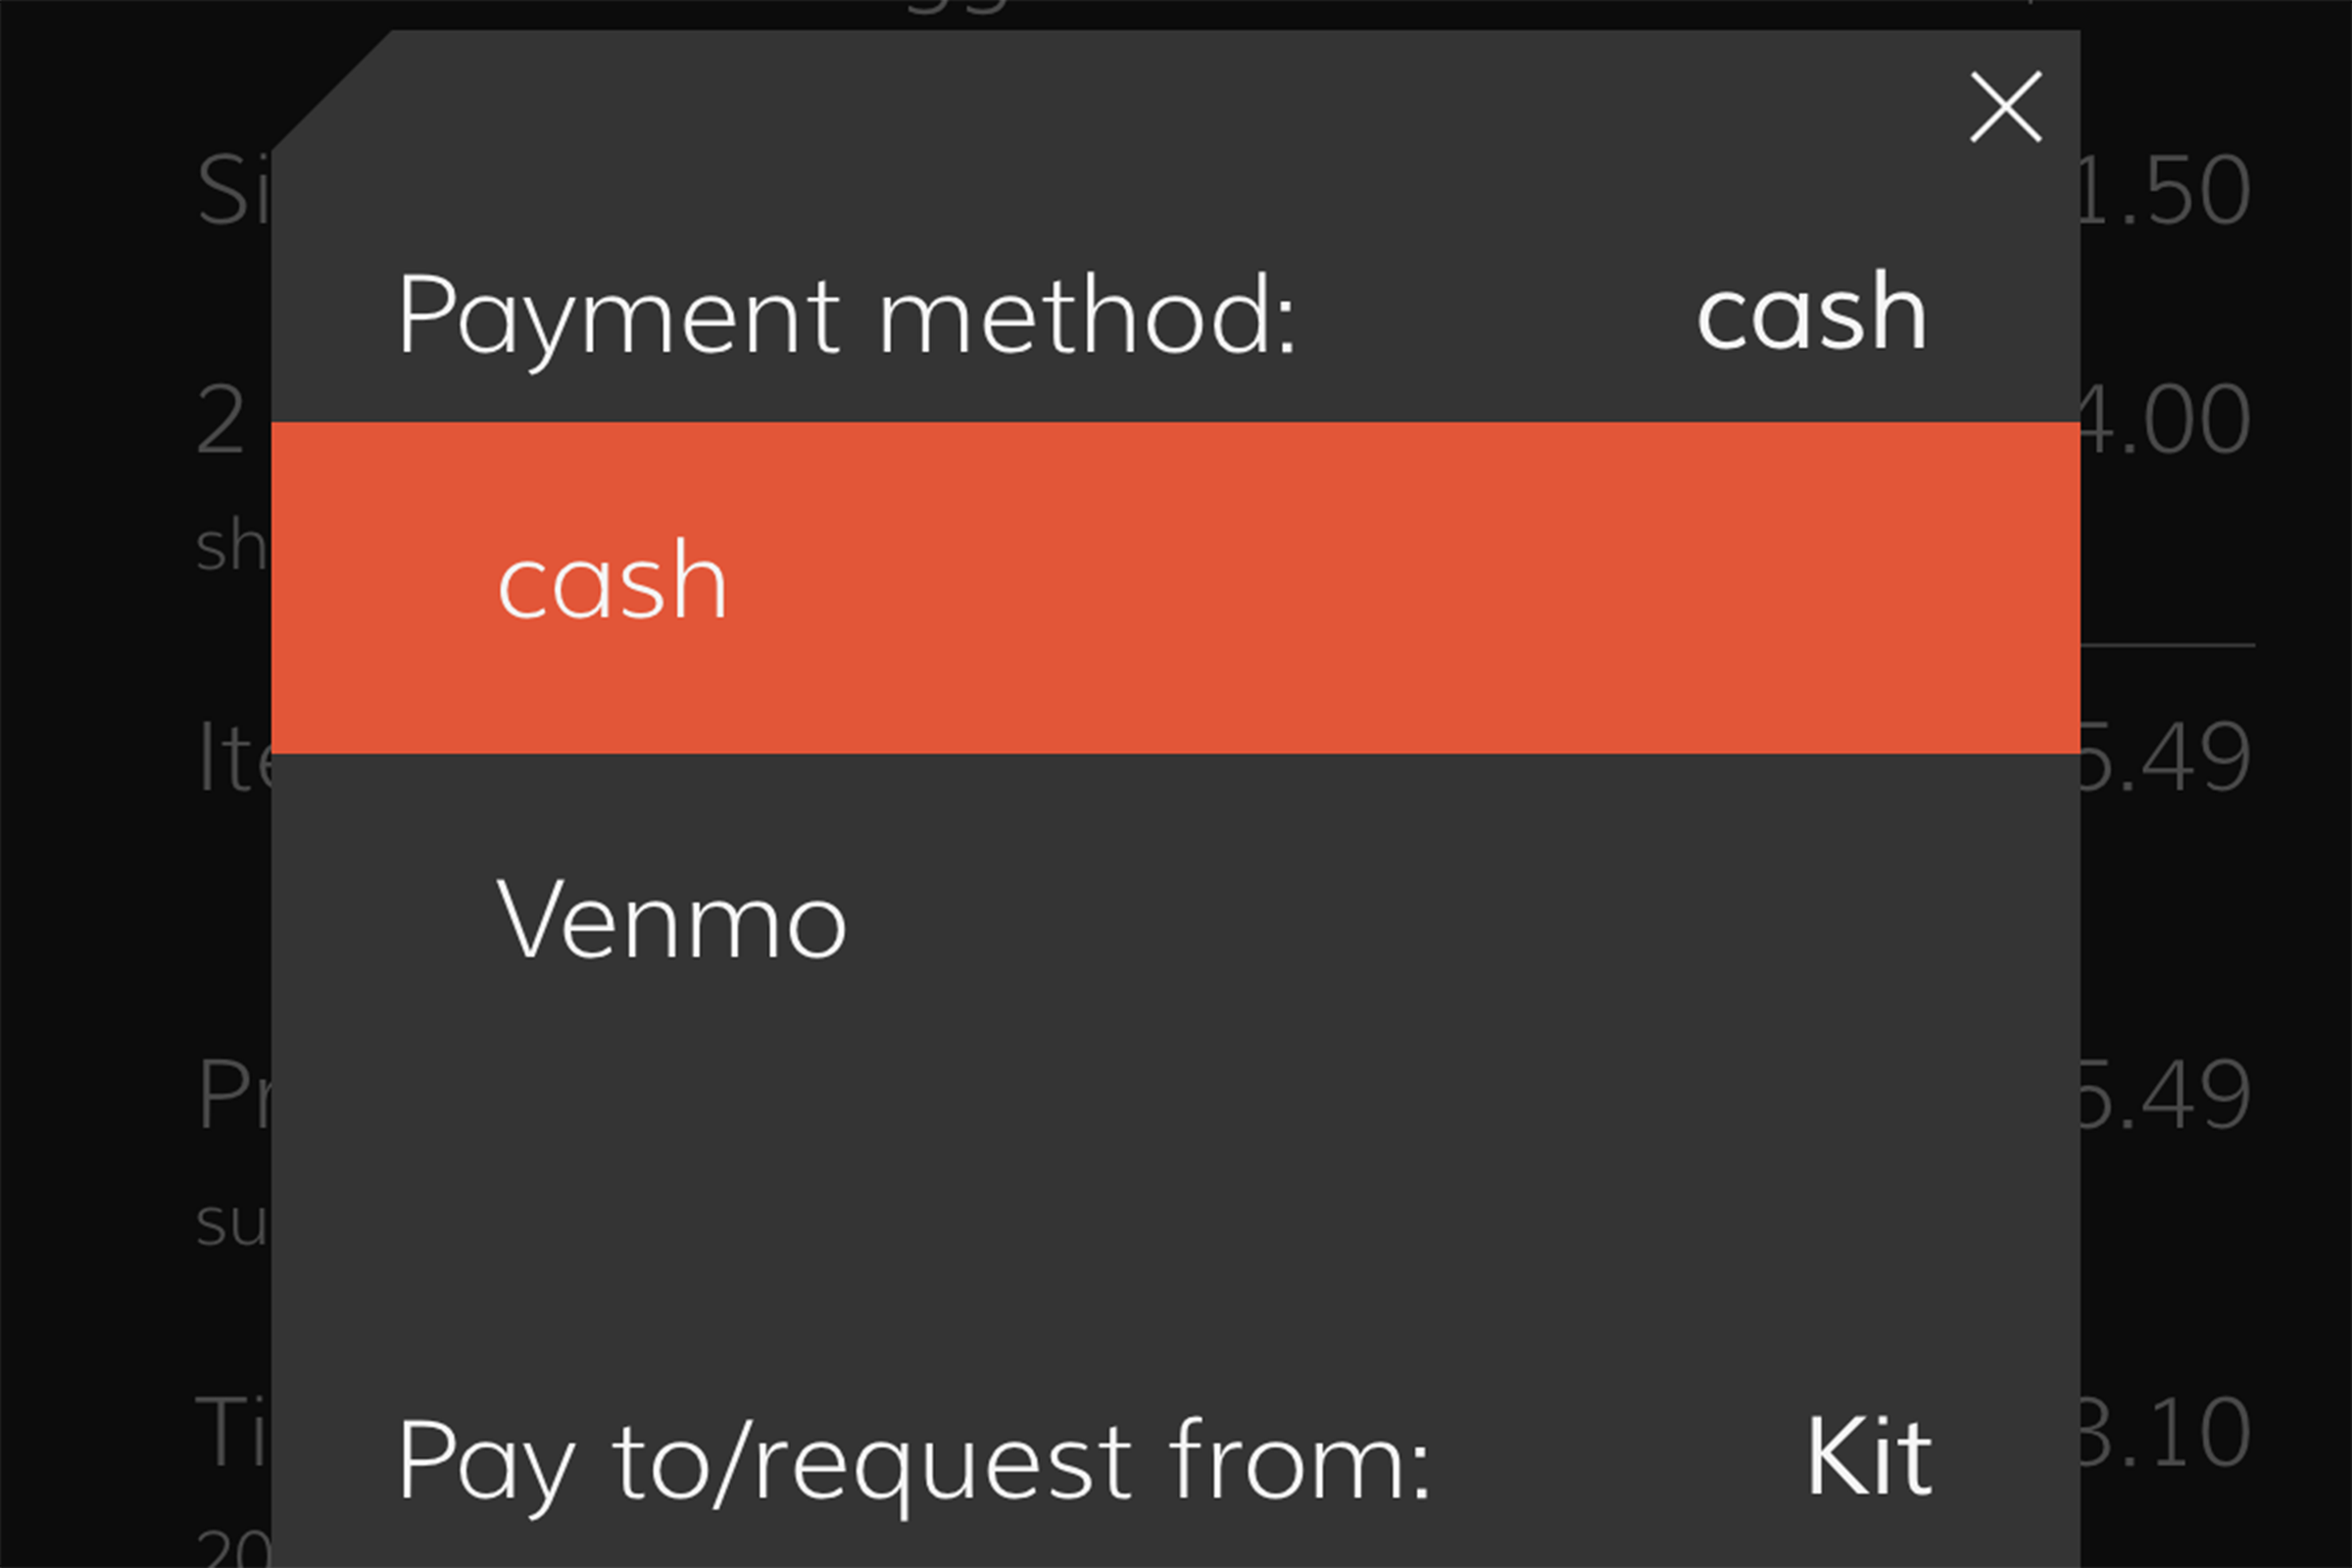 Tab gives two options for payment: cash or Venmo.